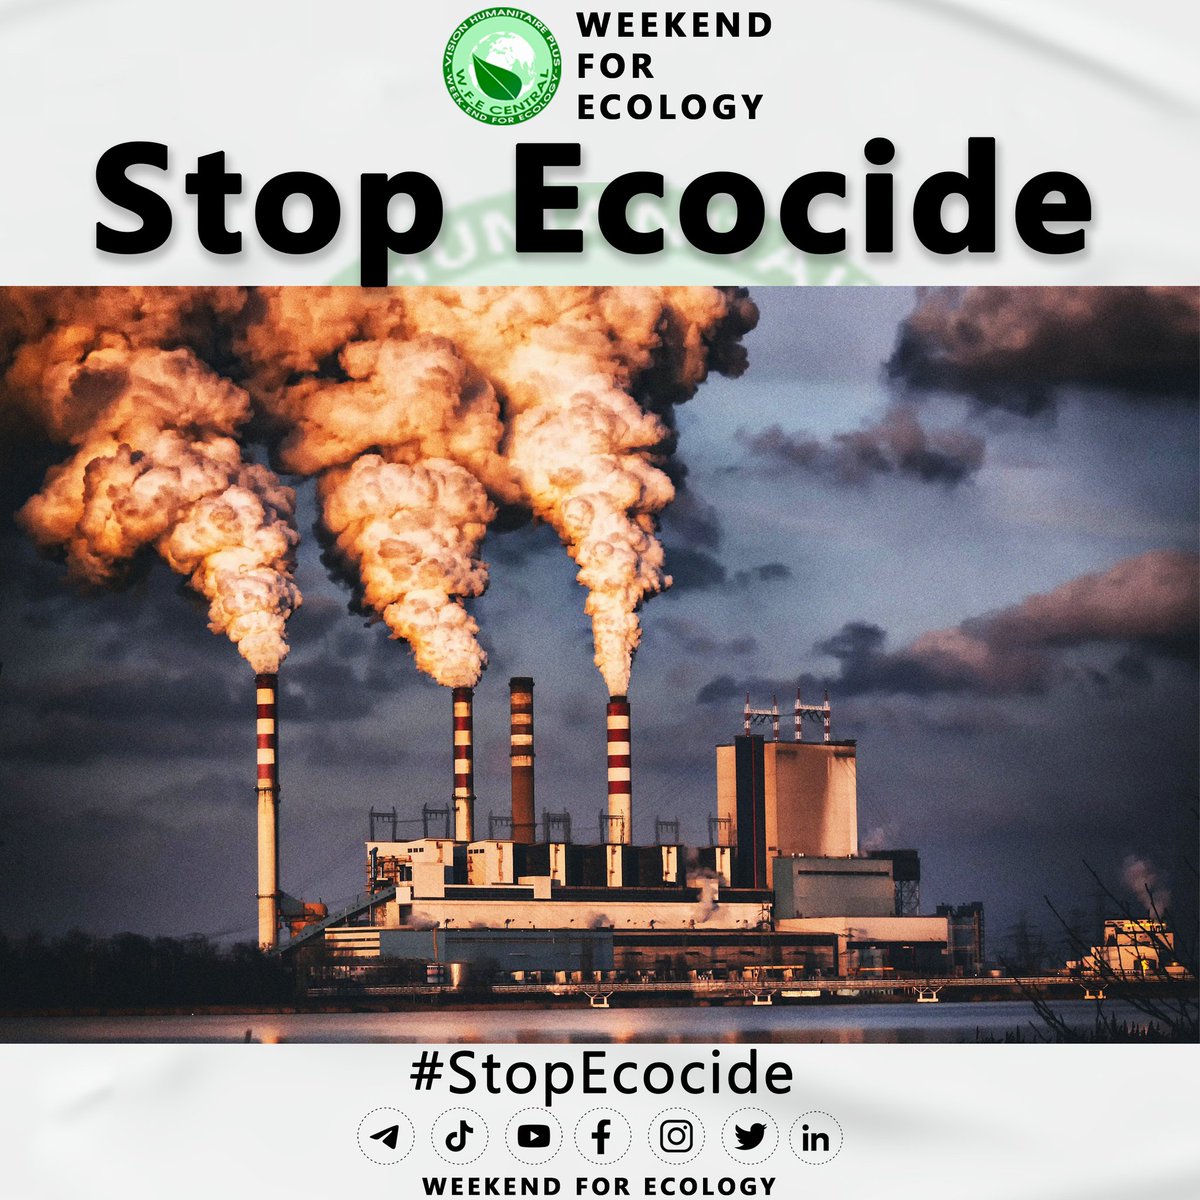 Environmental pollution is dangerous, refusing to compensate for the damage caused is even more dangerous.
polluters must pay for the damage they cause to the environment.
#StopEcocide #Now
#WeekendForEcology 
#ClimateChaos #ClimateActionNow #viralvideo @BeeAsMarine